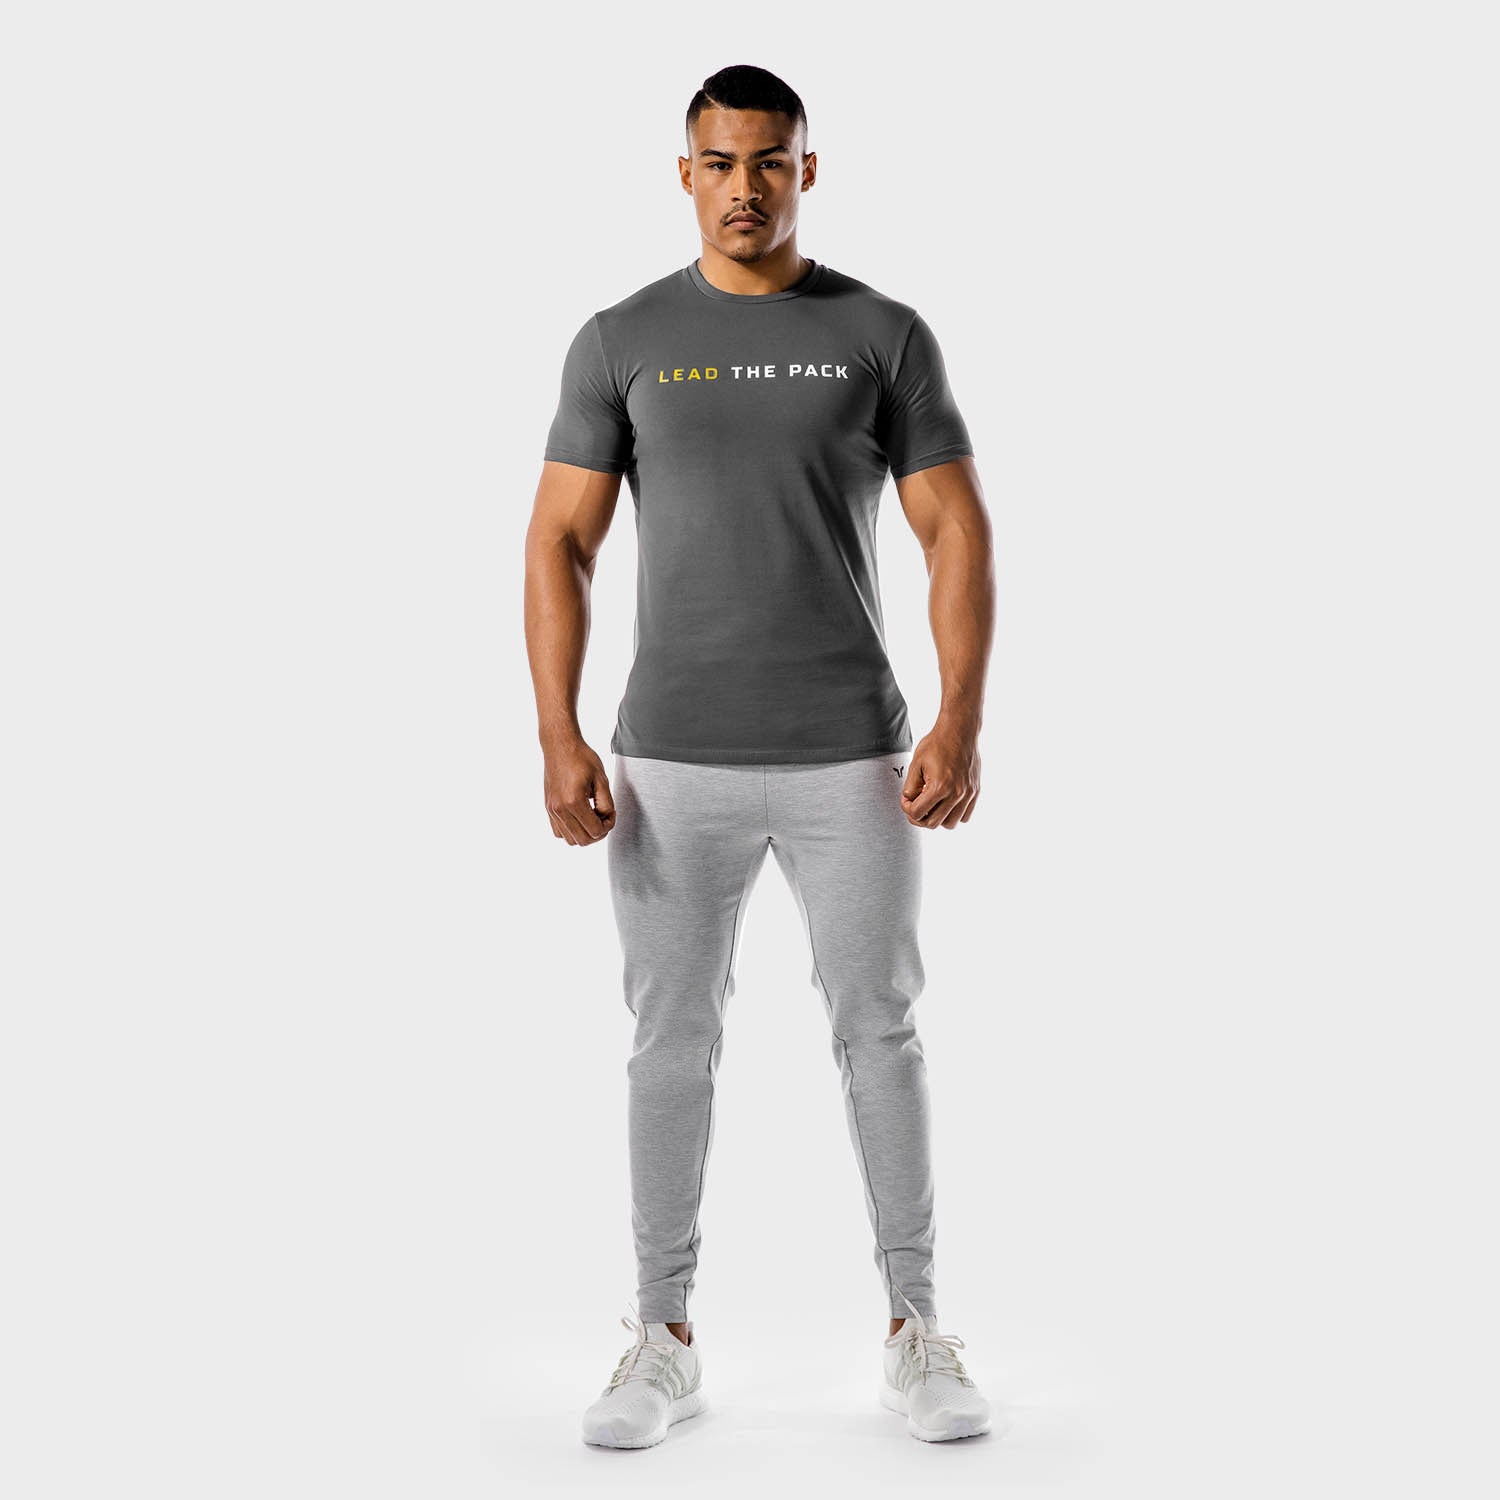 squatwolf-gym-t-shirts-for-women-the-pack-muscle-tee-grey-workout-clothes